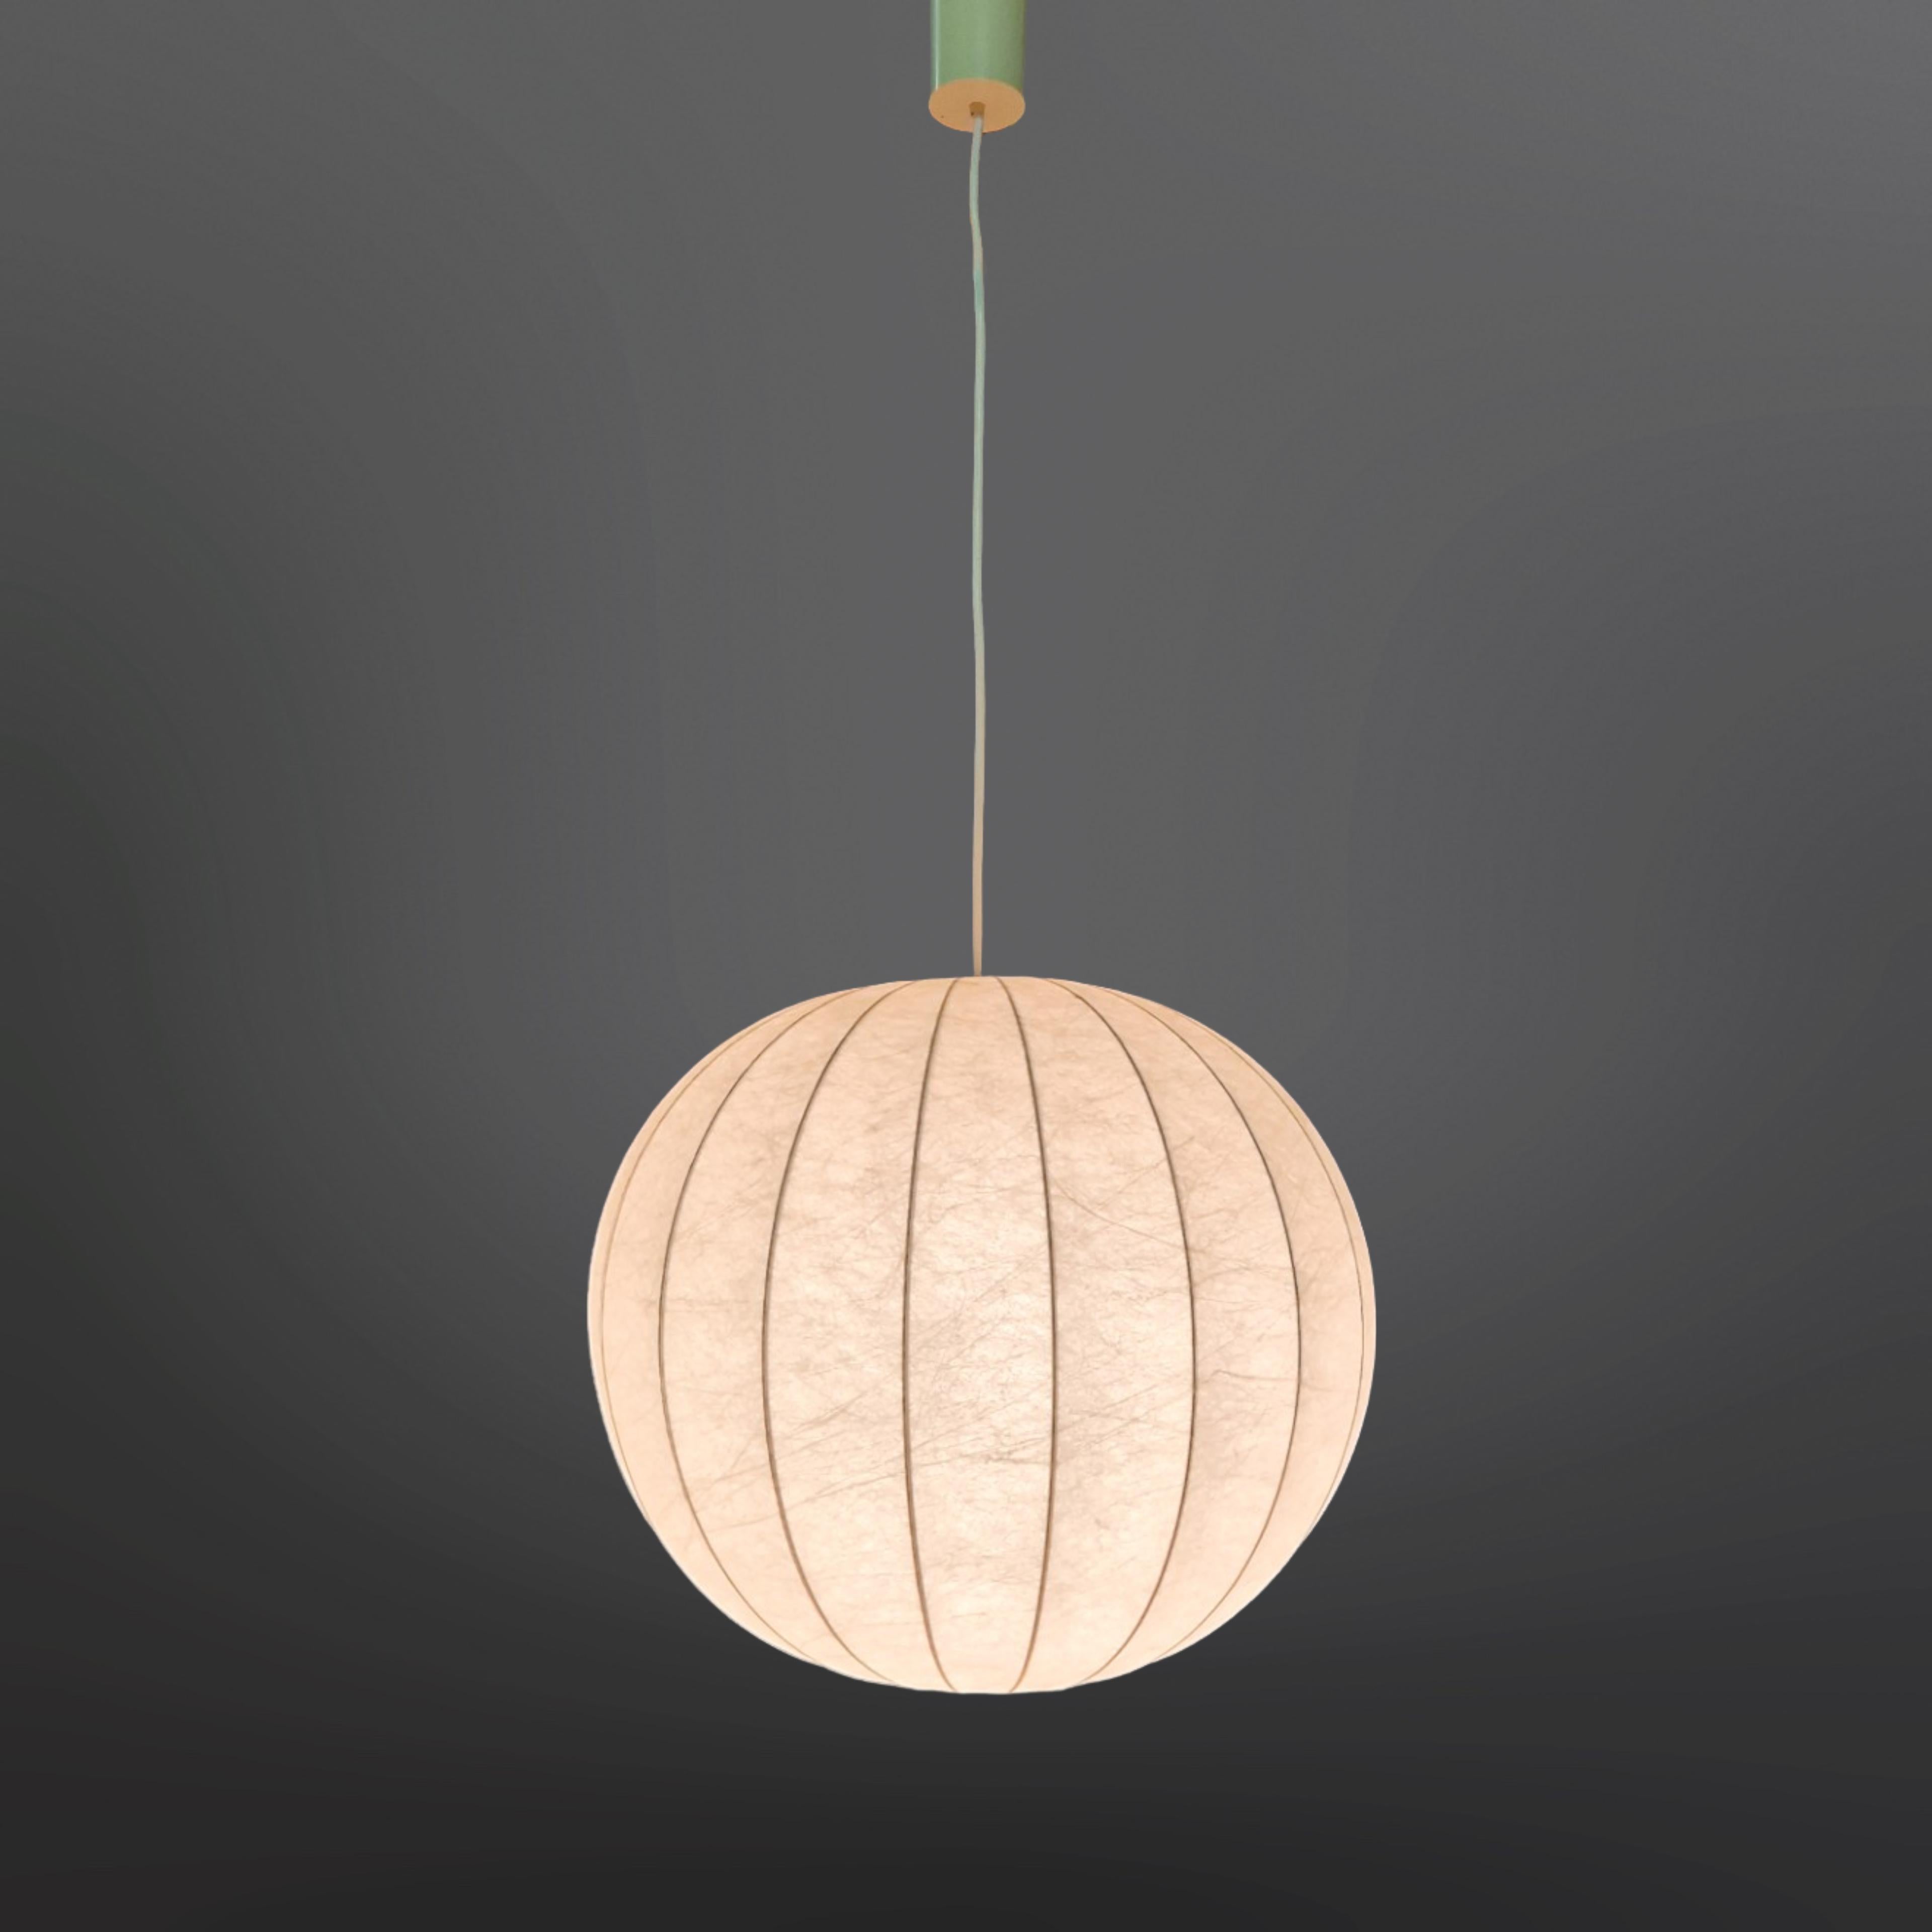 Large cocoon pendant lamp. In the style of Pier and Achille Castiglioni. Most likely made by German company Goldkant leuchten in the 1960s. 
The lamp has a metal wire frame with some sort of rubber surrounding it. The design resembles Chinese